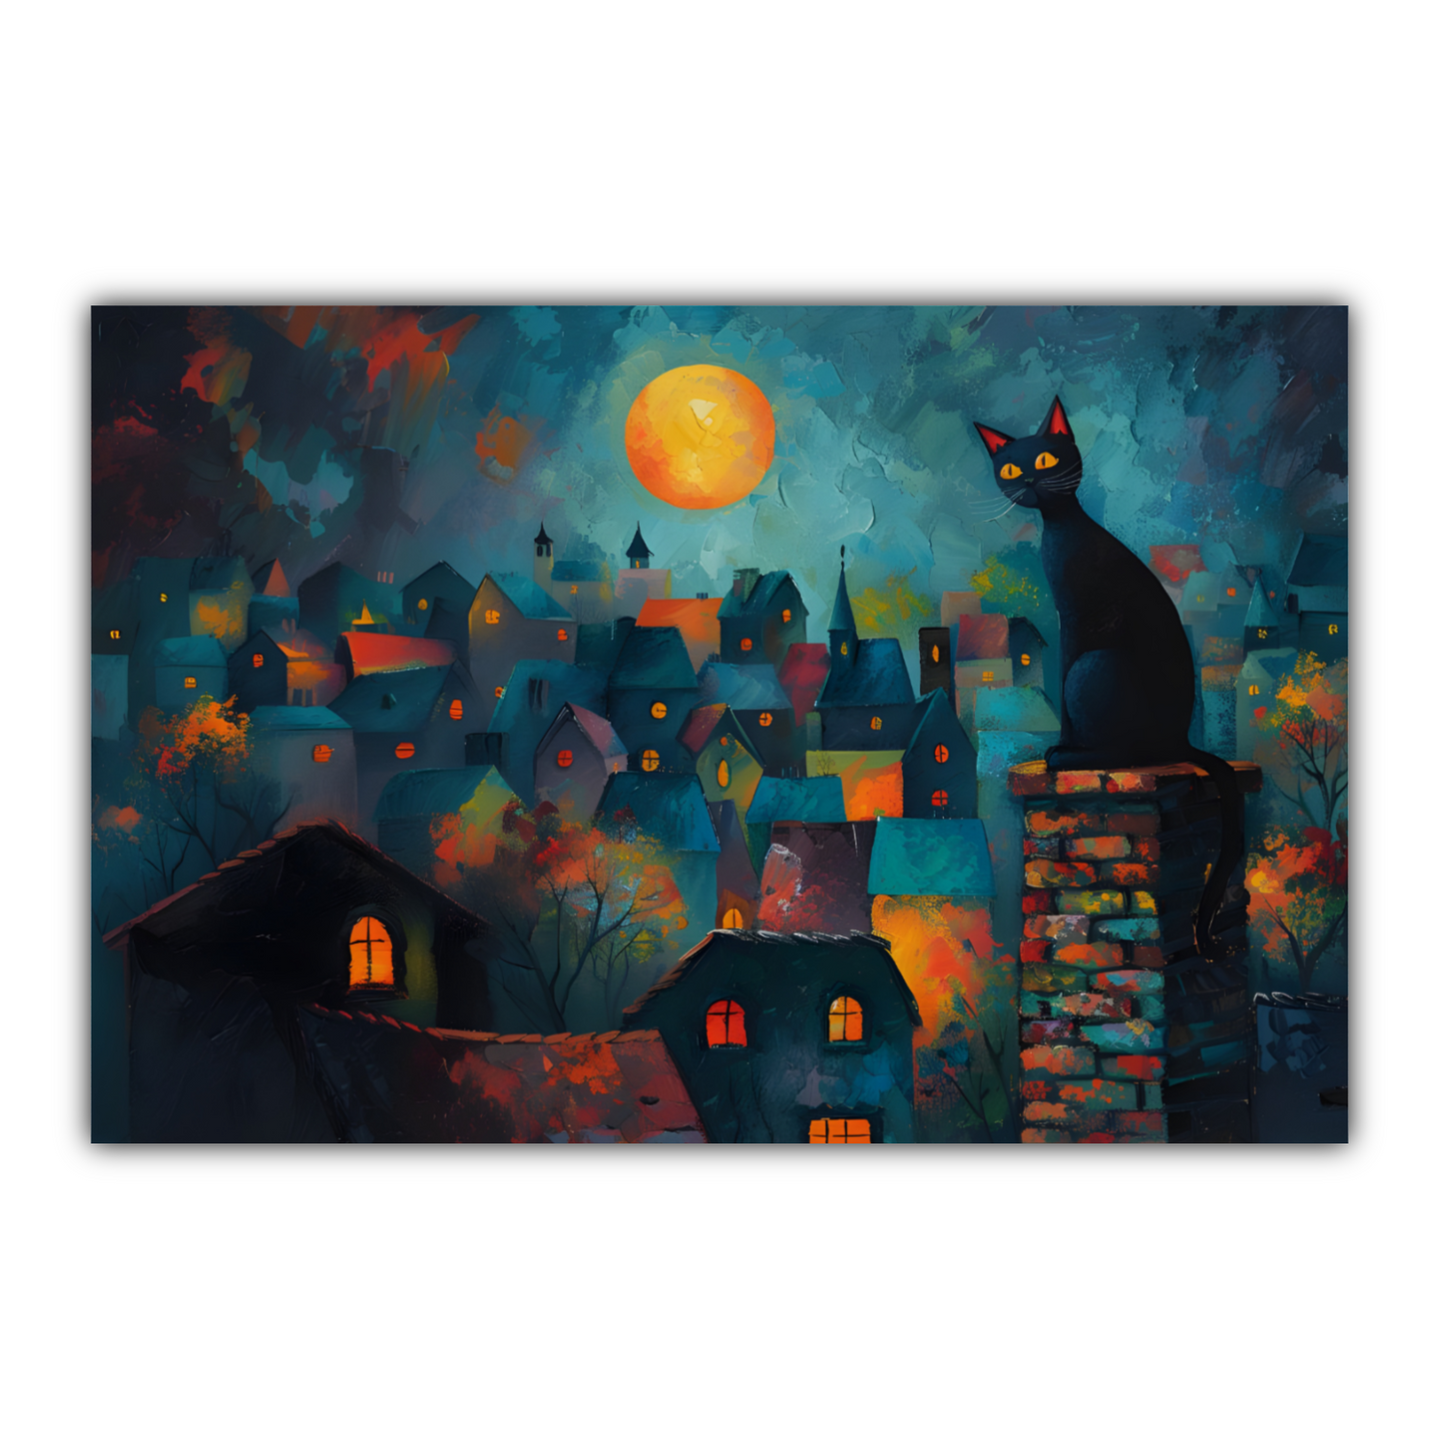 Twilight Over Rooftops  Deluxe Box Landscape Canvas Prints